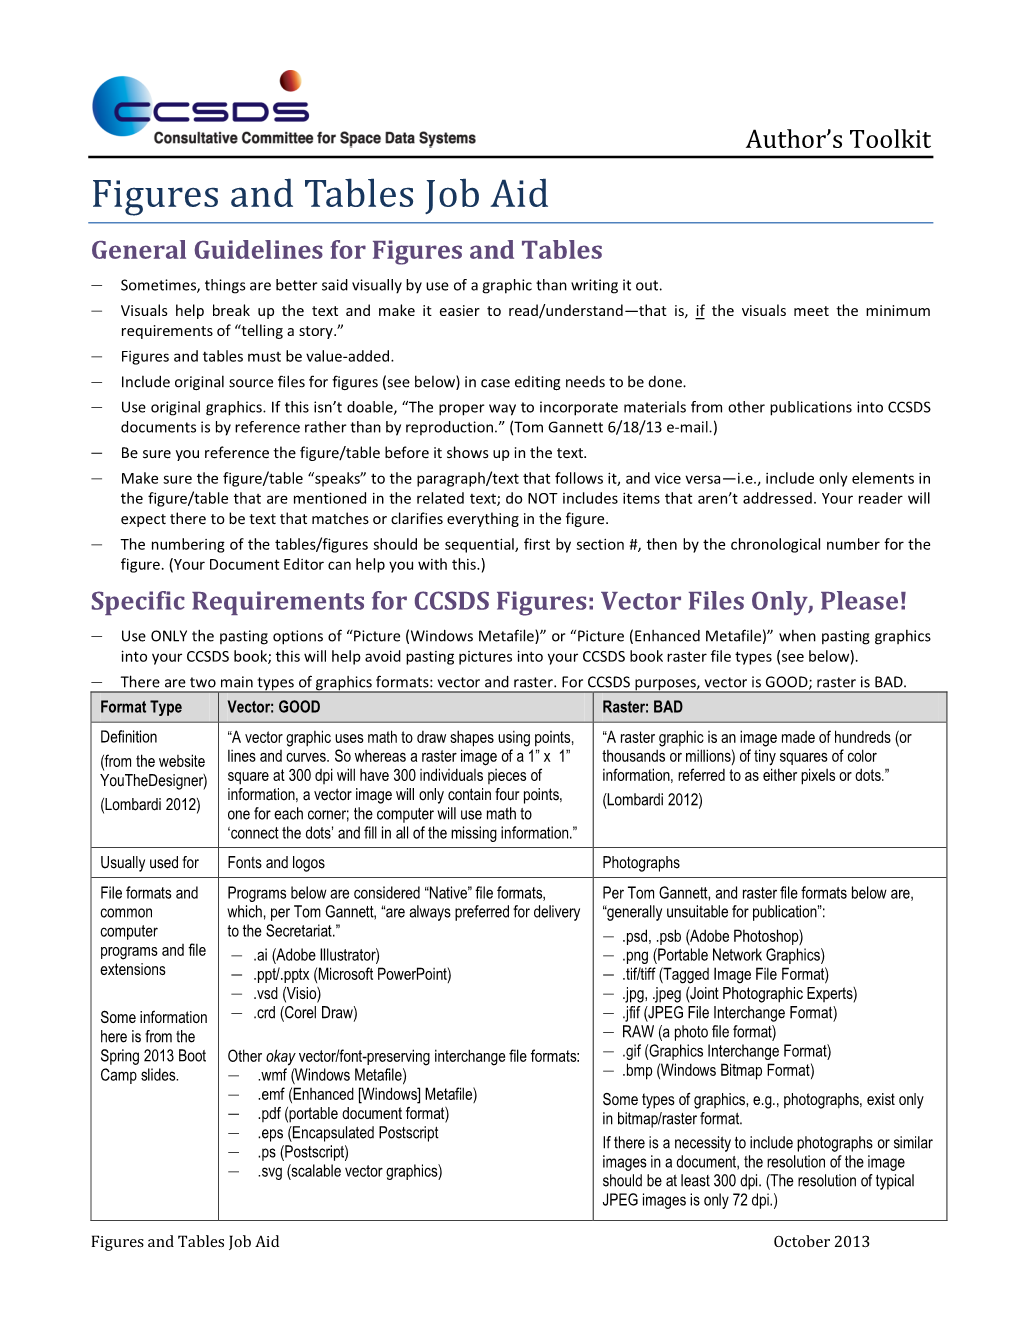 10 Figures and Tables--Job